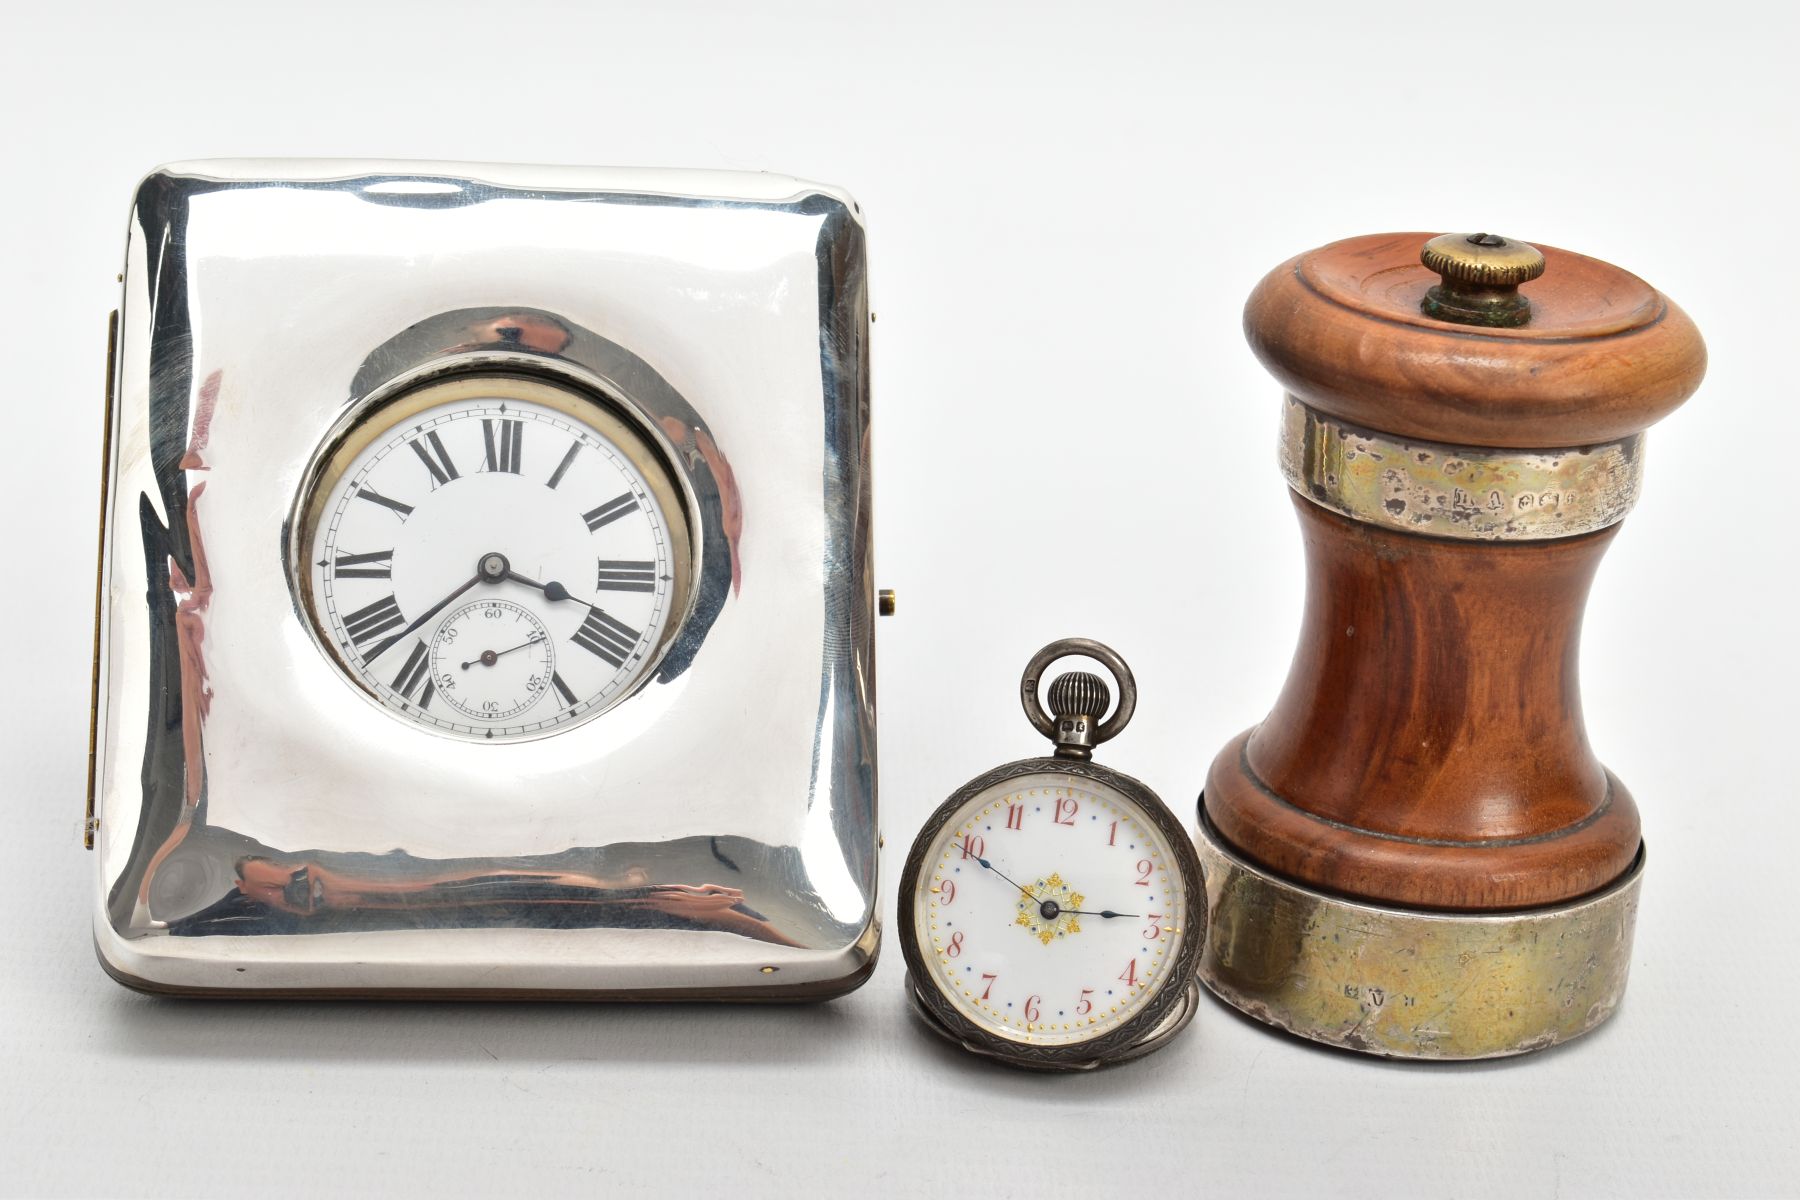 AN OPEN FACE POCKET WATCH WITH CASE, A LADIES SILVER POCKET WATCH AND A SALT MILL, a white metal